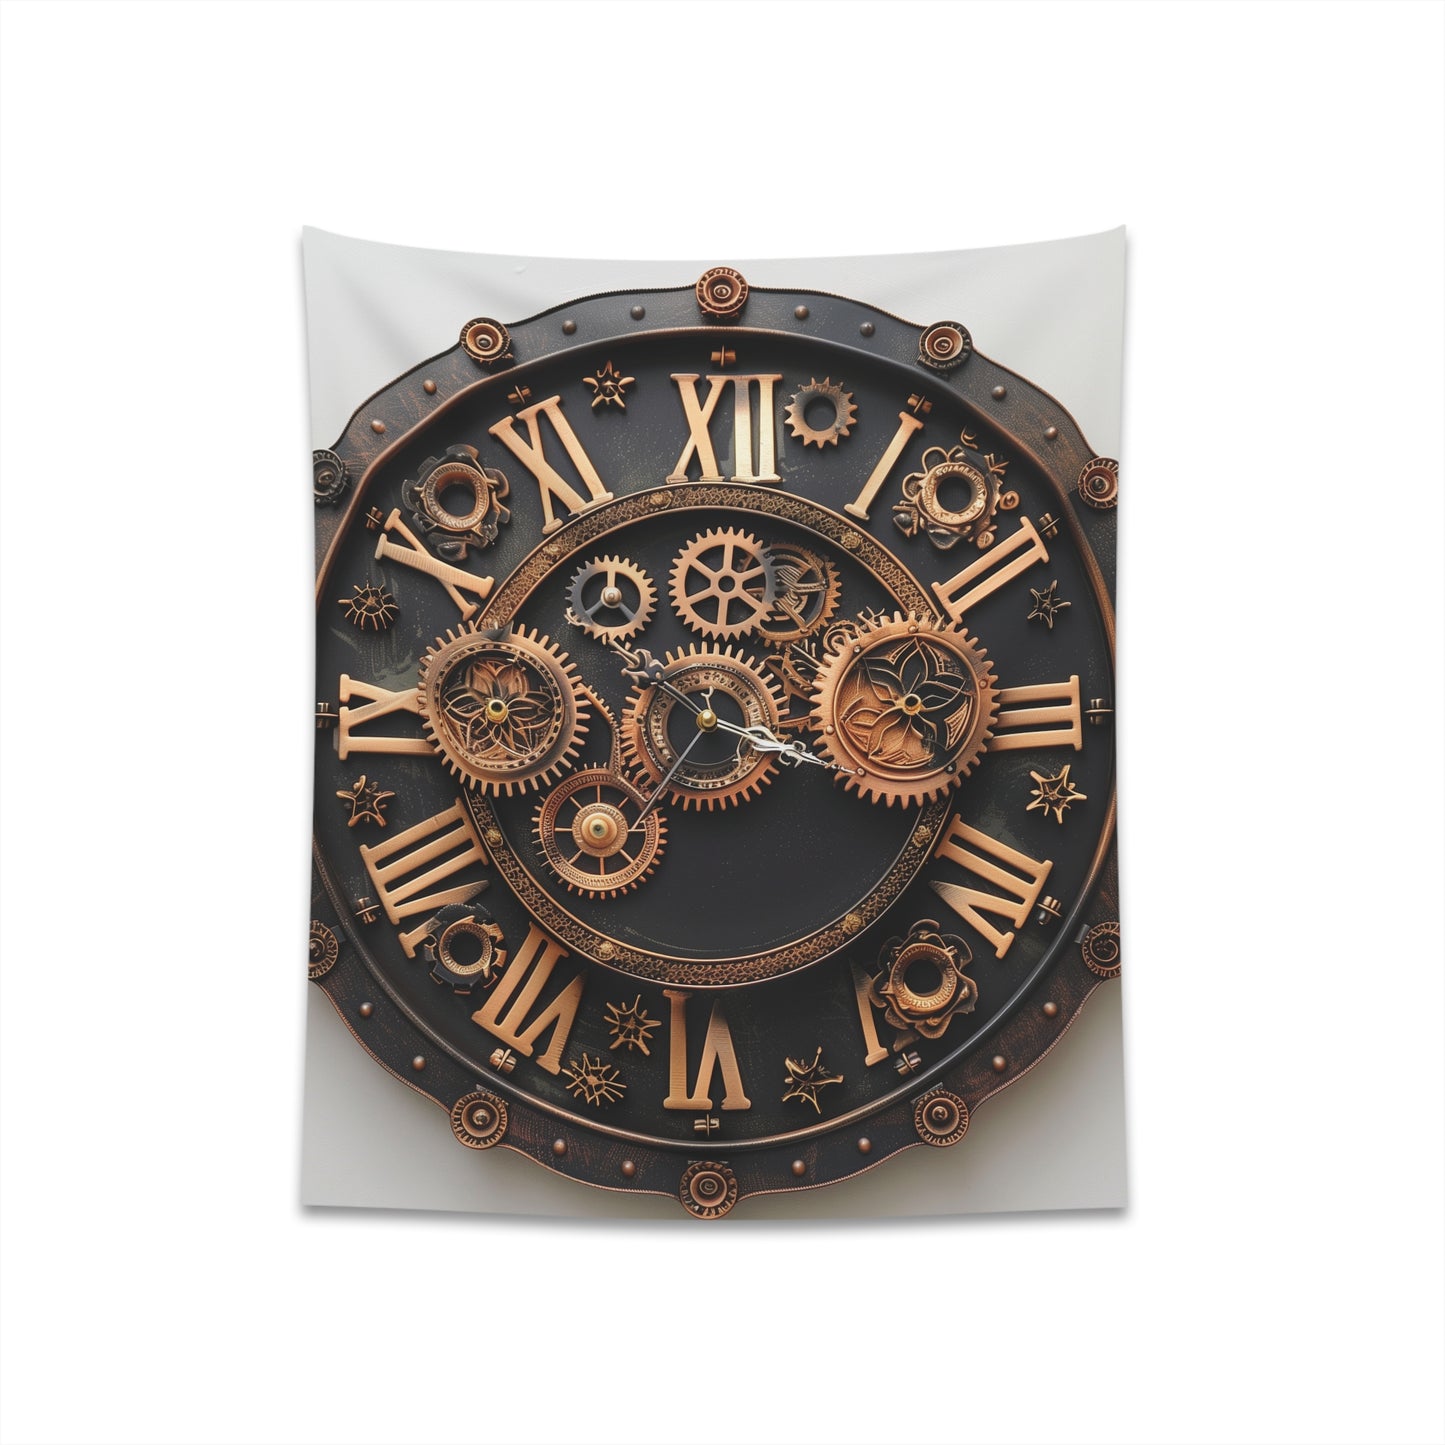 Steampunk Timepiece Tapestry with Gears and Cogs | Industrial Clock Art for Home Decor